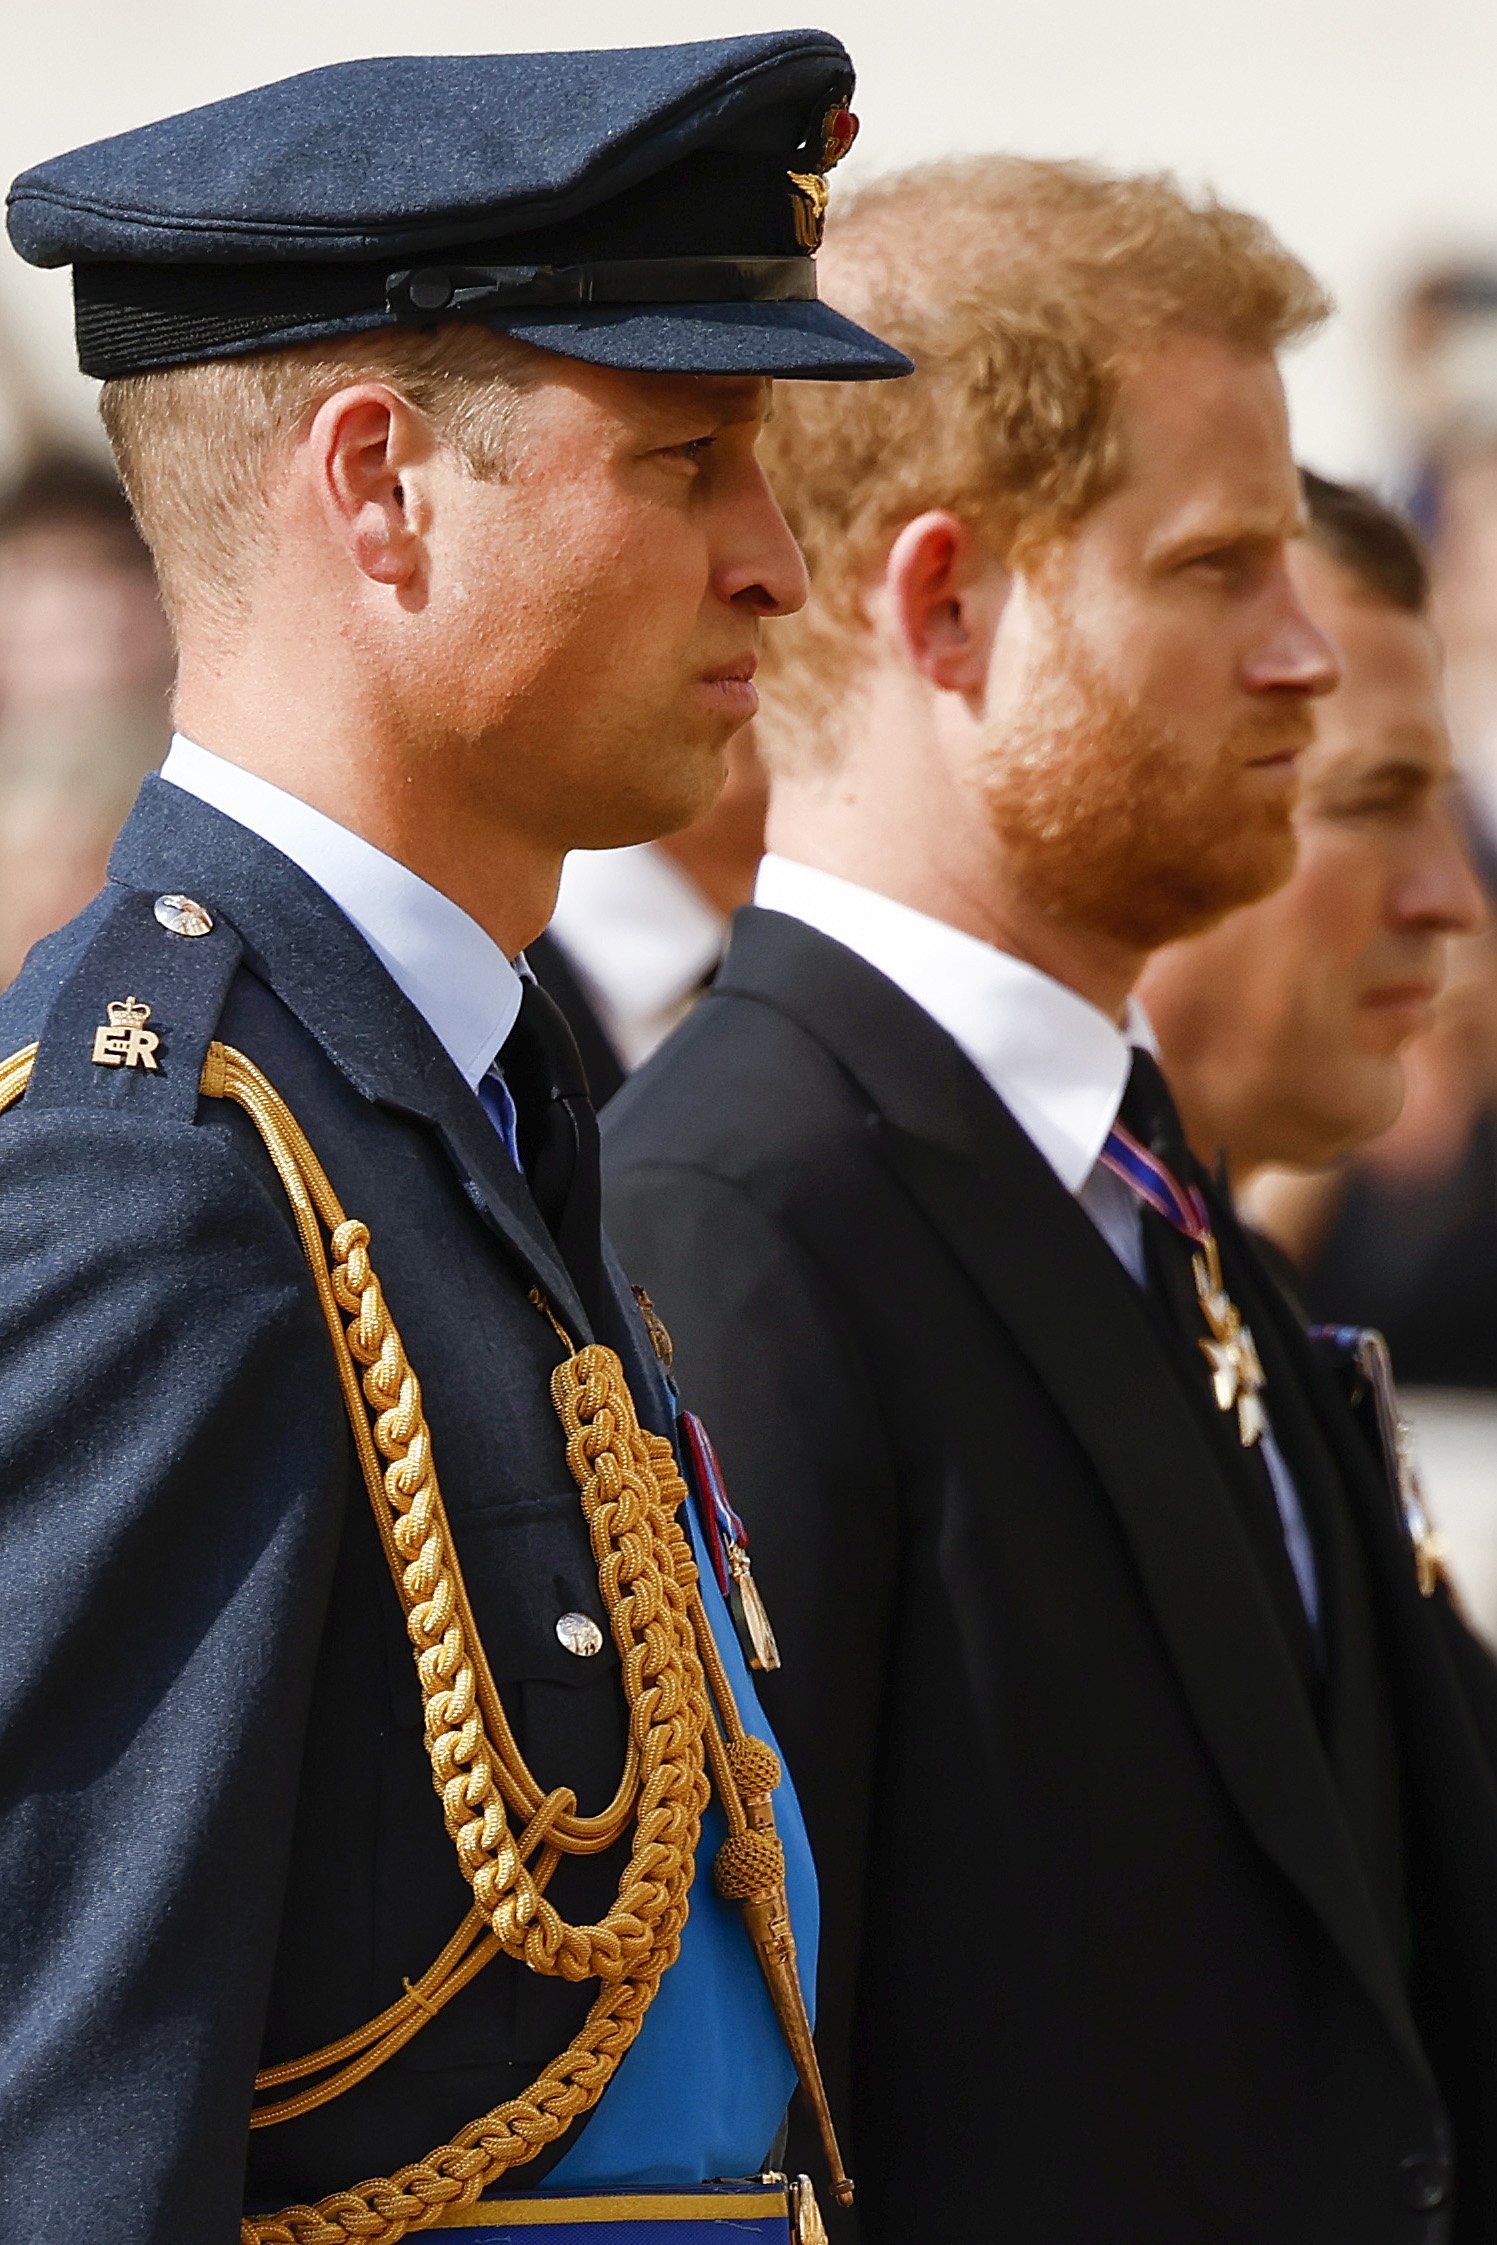 Prince William, Prince of Wales and Prince Harry, Duke of Sussex walk behind the coffin during the procession for the Lying-in State of Queen Elizabeth II on September 14, 2022 in London, England | Source: Getty Images 